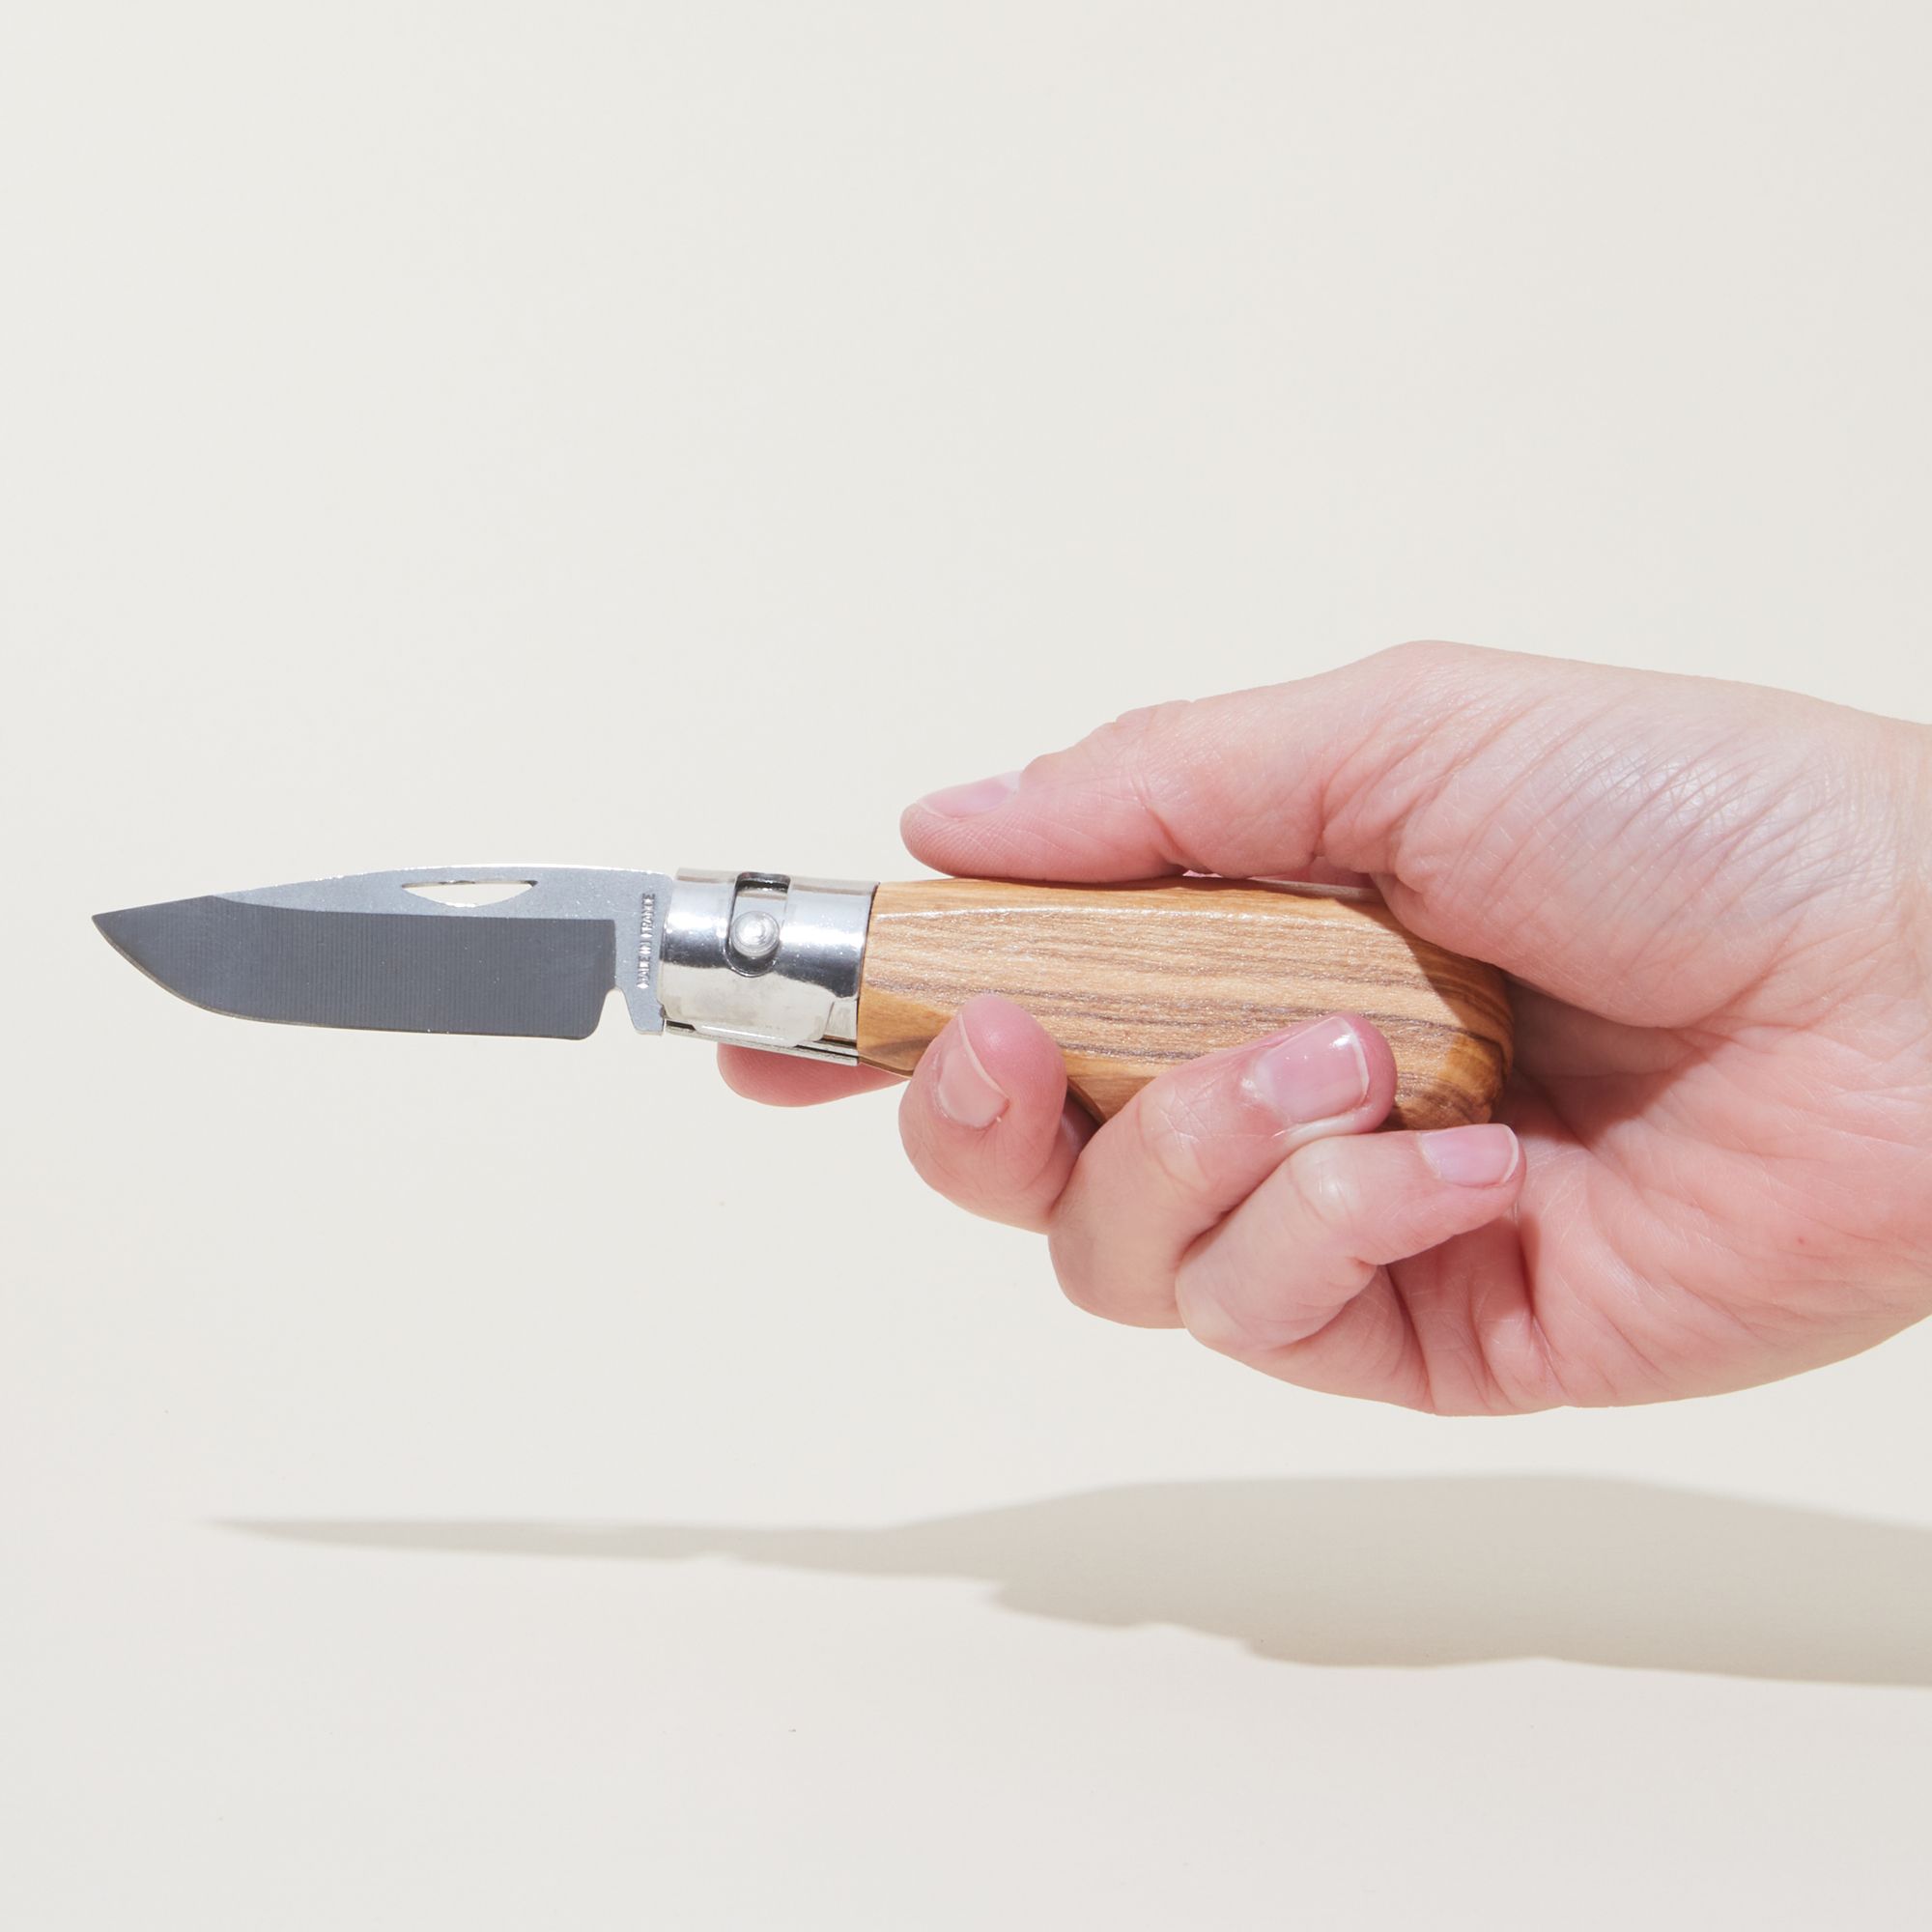 Hand holding an open pocket knife with an olivewood handle